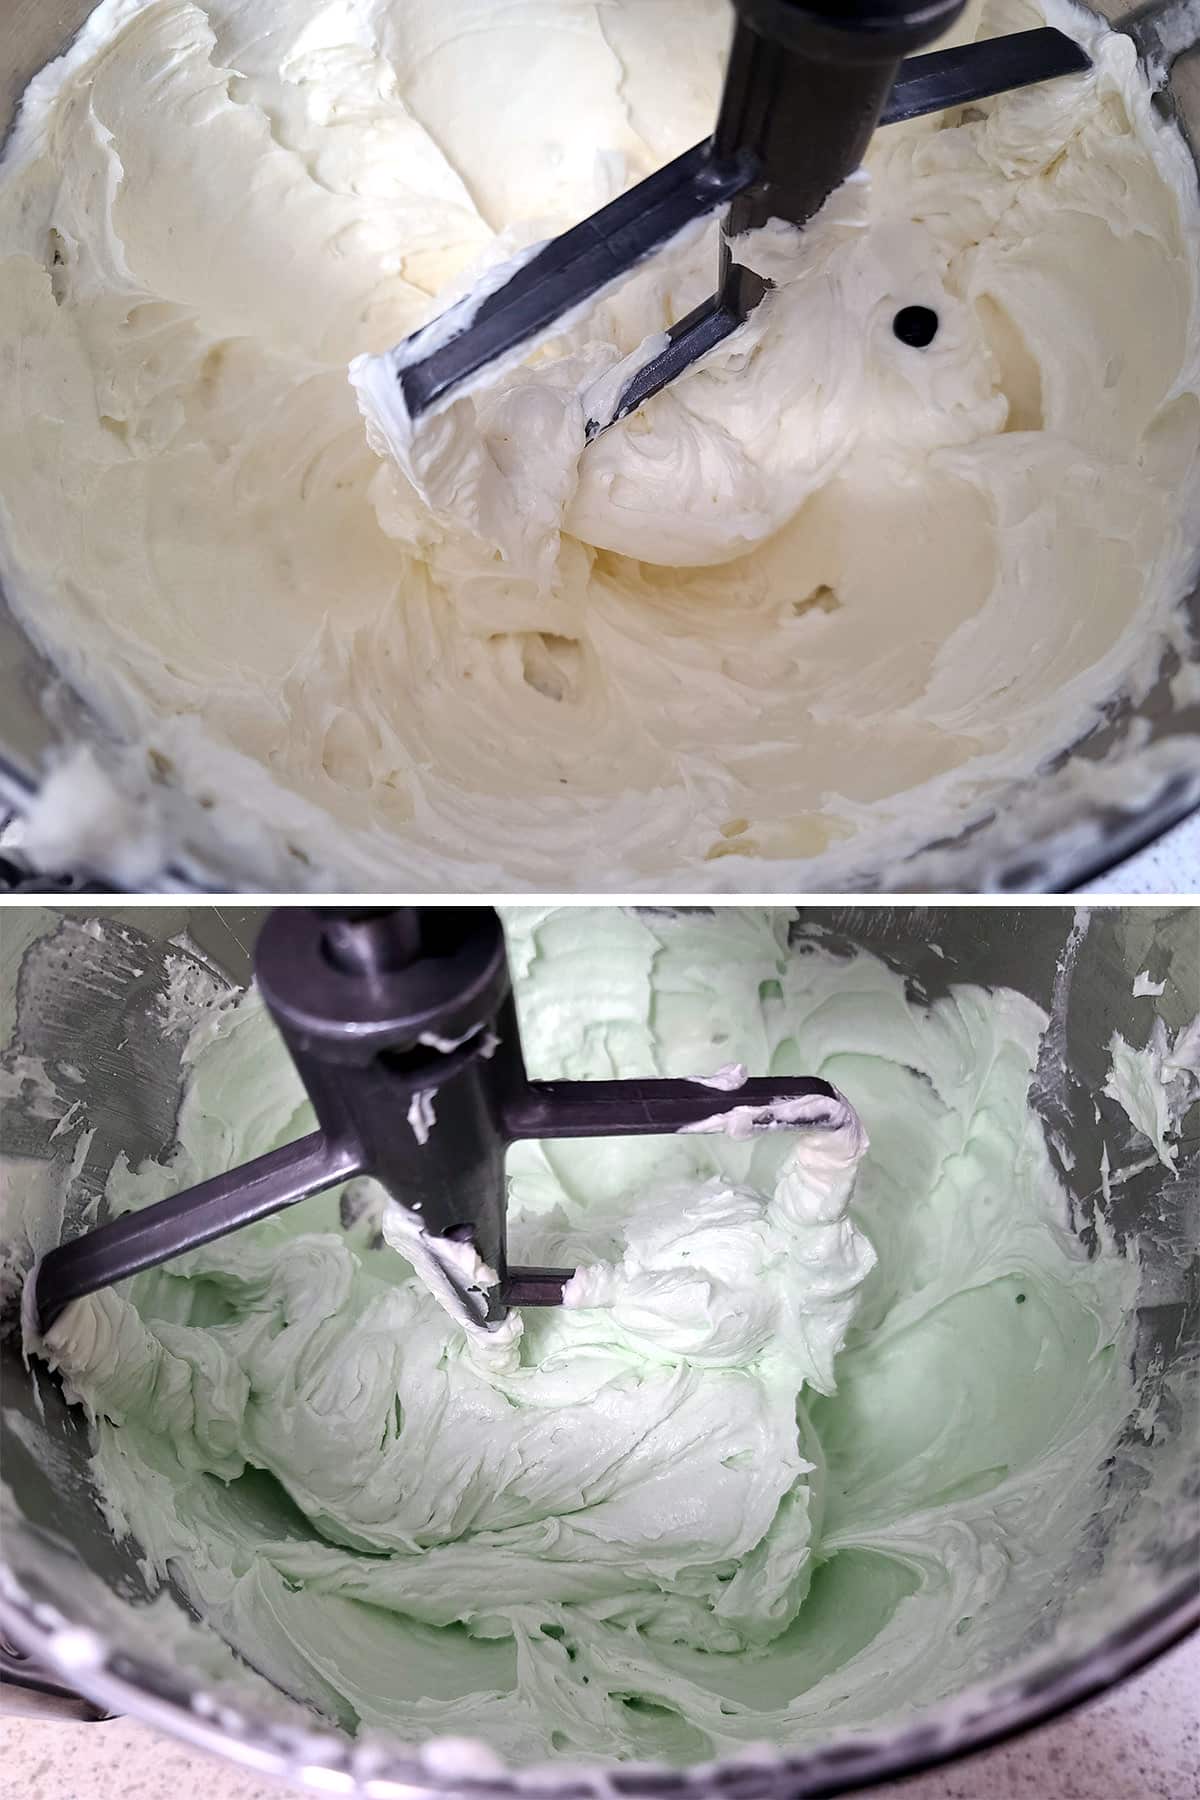 A 2 part image showing a little green food coloring being added to a mixer bowl of white icing, and beaten to a light green colour.